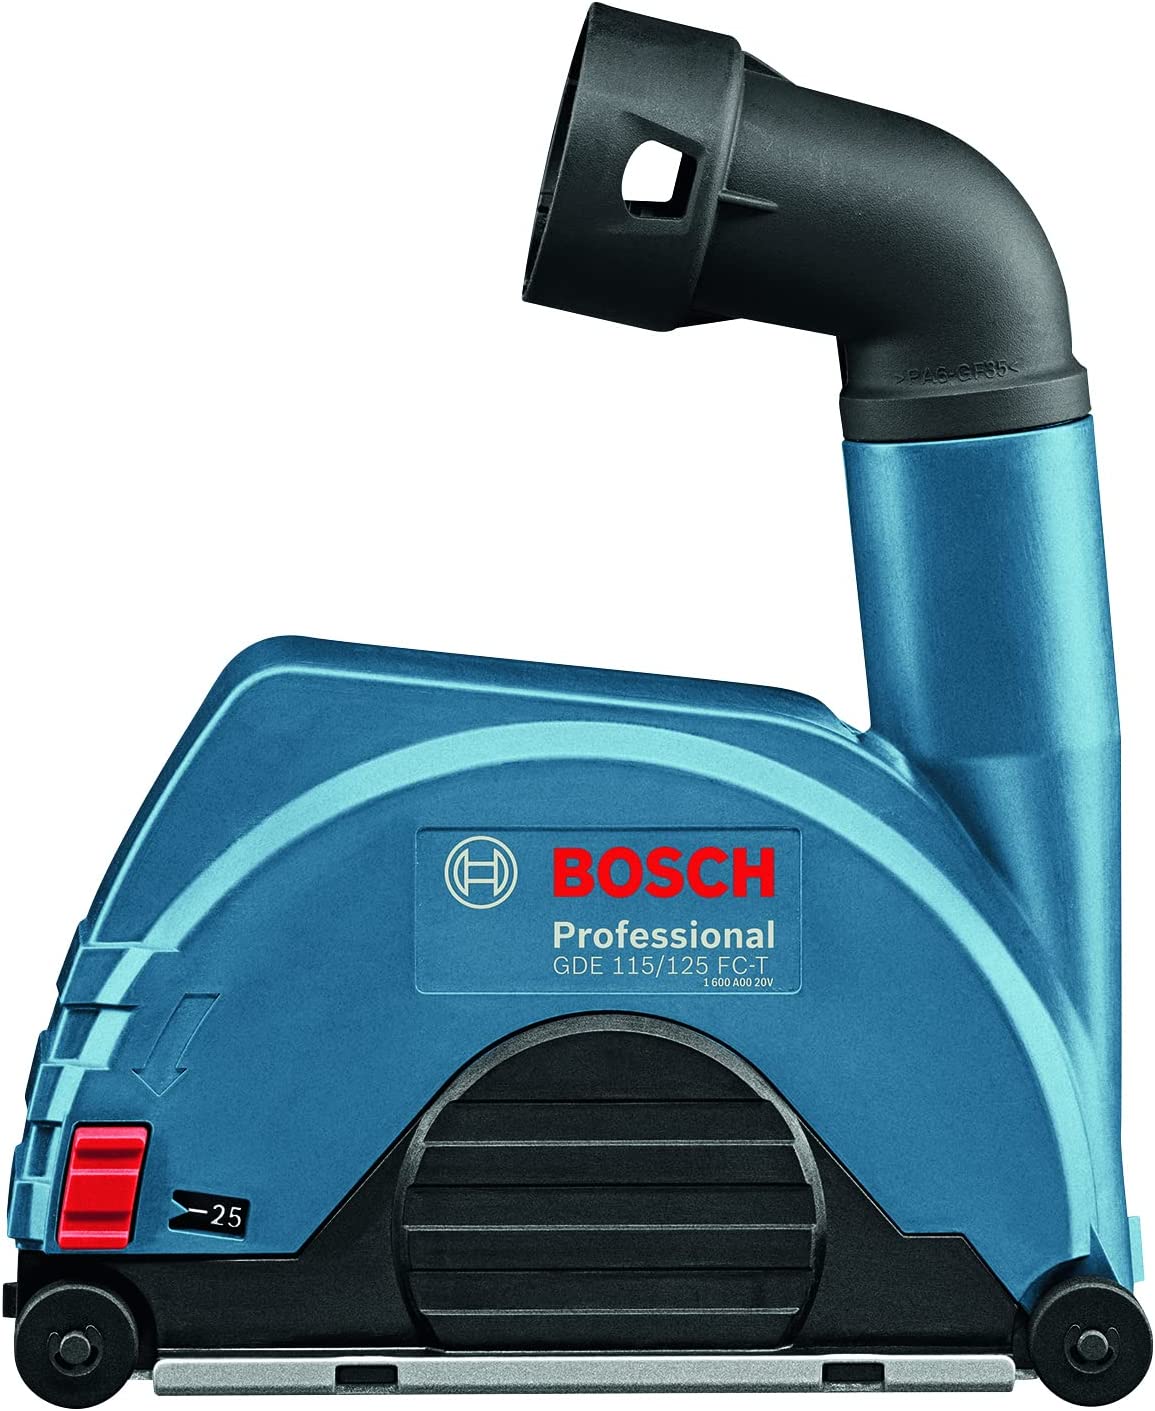 Bosch Professional GDE 115125 FC-T Dust Guard Extractor for Small Angle Grinders